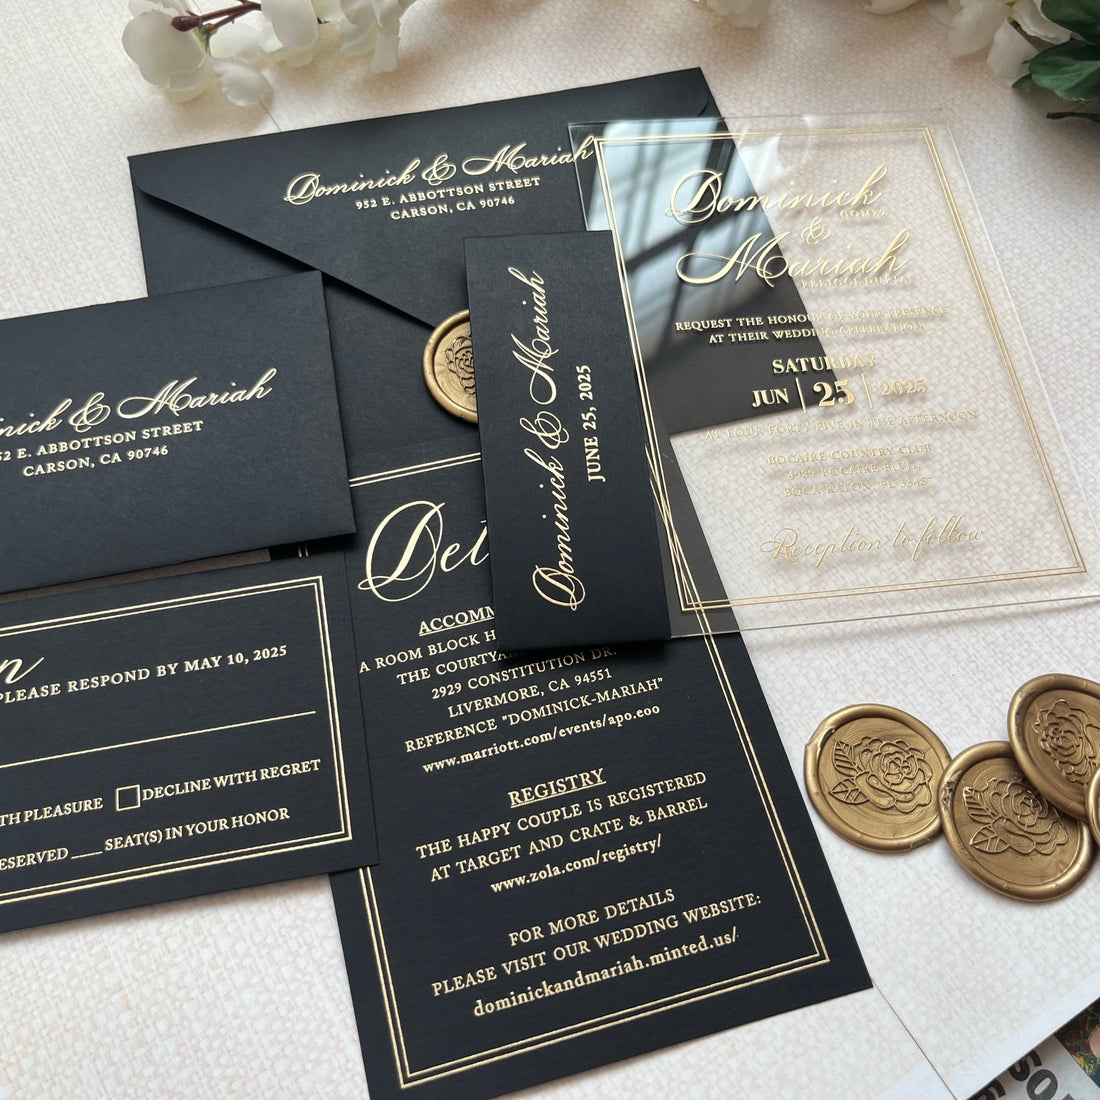 Stunning Acrylic Wedding Invitation Set with RSVP, featuring Gold Foil Accents. Personalized Kit including Gold Foil Details